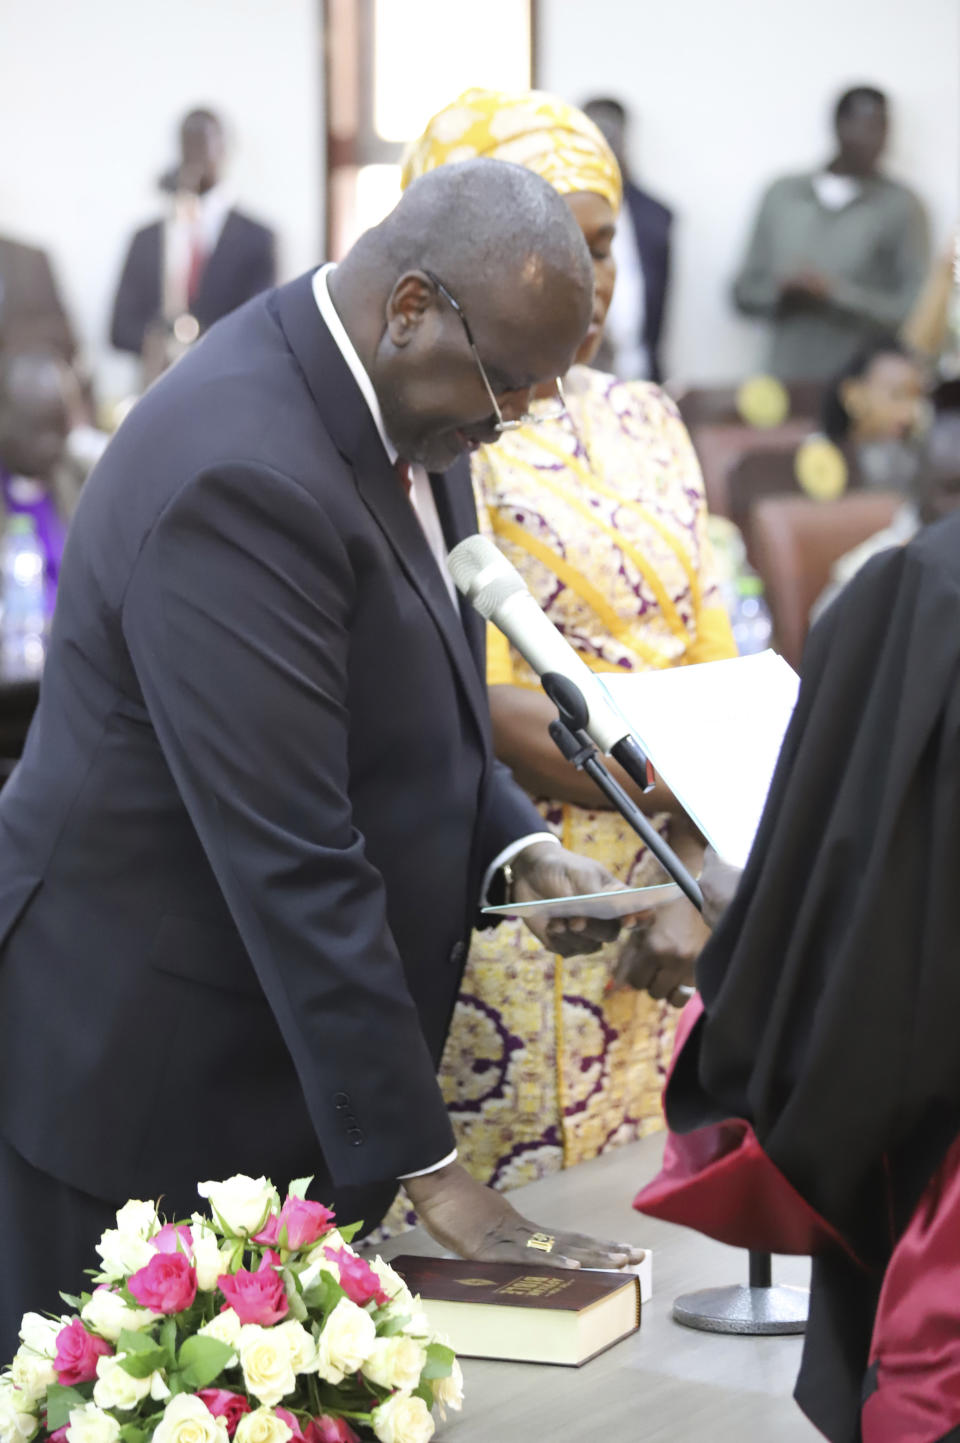 Dr. Riek Machar, during swearing in ceremony in Juba, South Sudan Saturday, Feb. 22, 2020. South Sudan opened a new chapter in its fragile emergence from civil war Saturday as rival leaders formed a coalition government that many observers prayed would last this time around. (AP Photo)